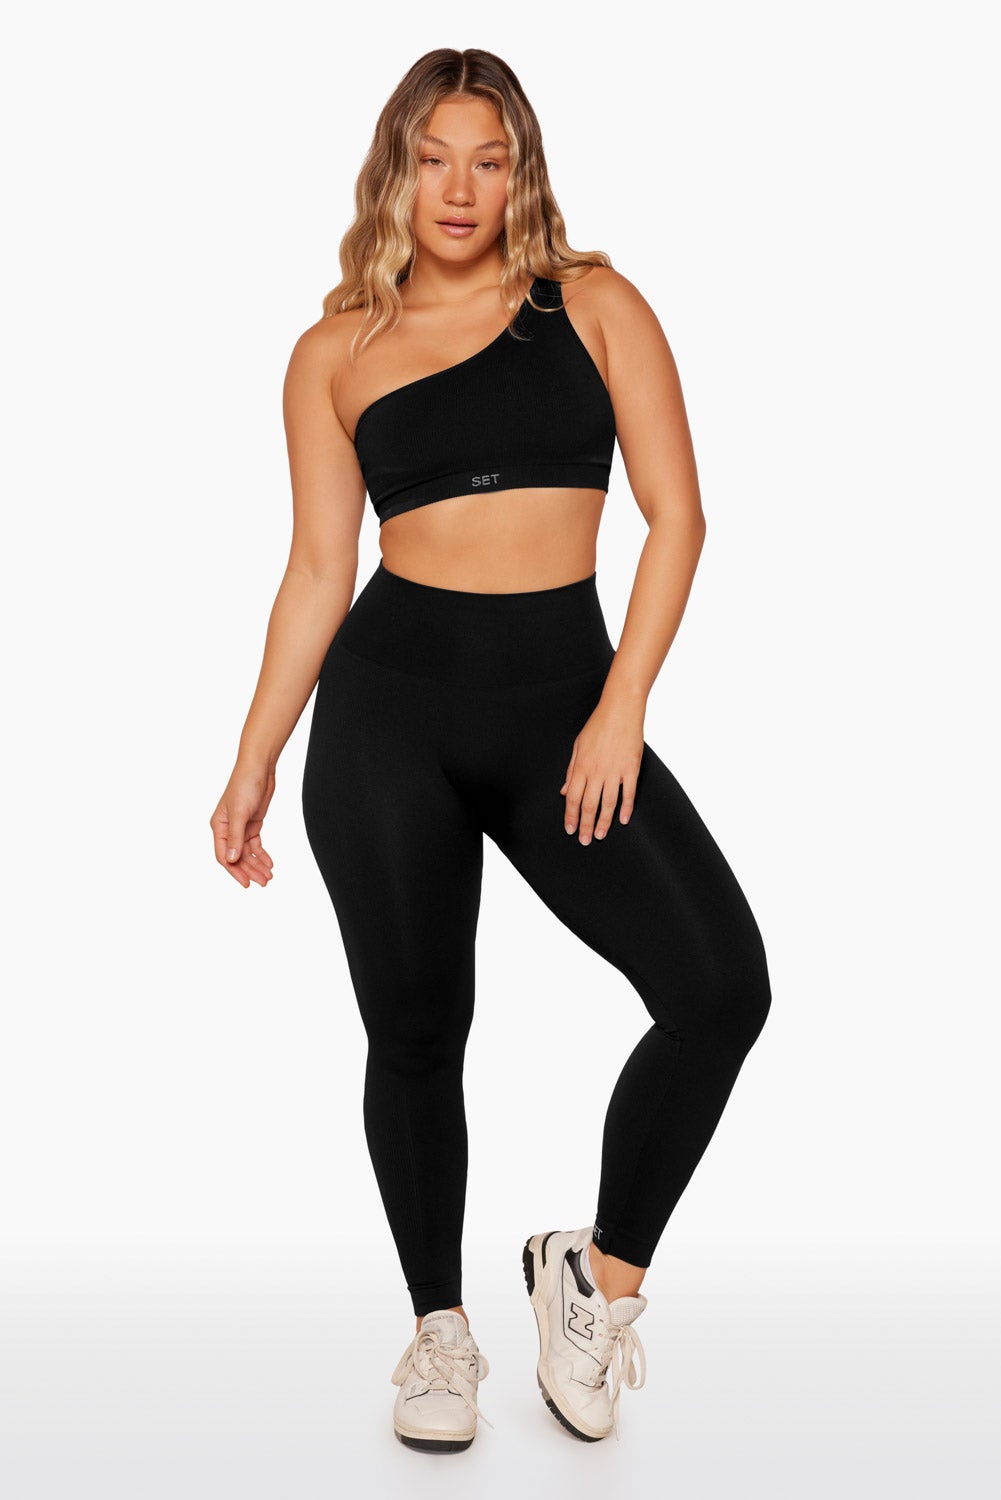 SM - Takara Shine Tuesday Giveaway!! Sis, you can win a pair of Carbon38 Takara  Shine legggings by following the steps below! These pants are my ALL TIME  favorite workout apparel!!! You